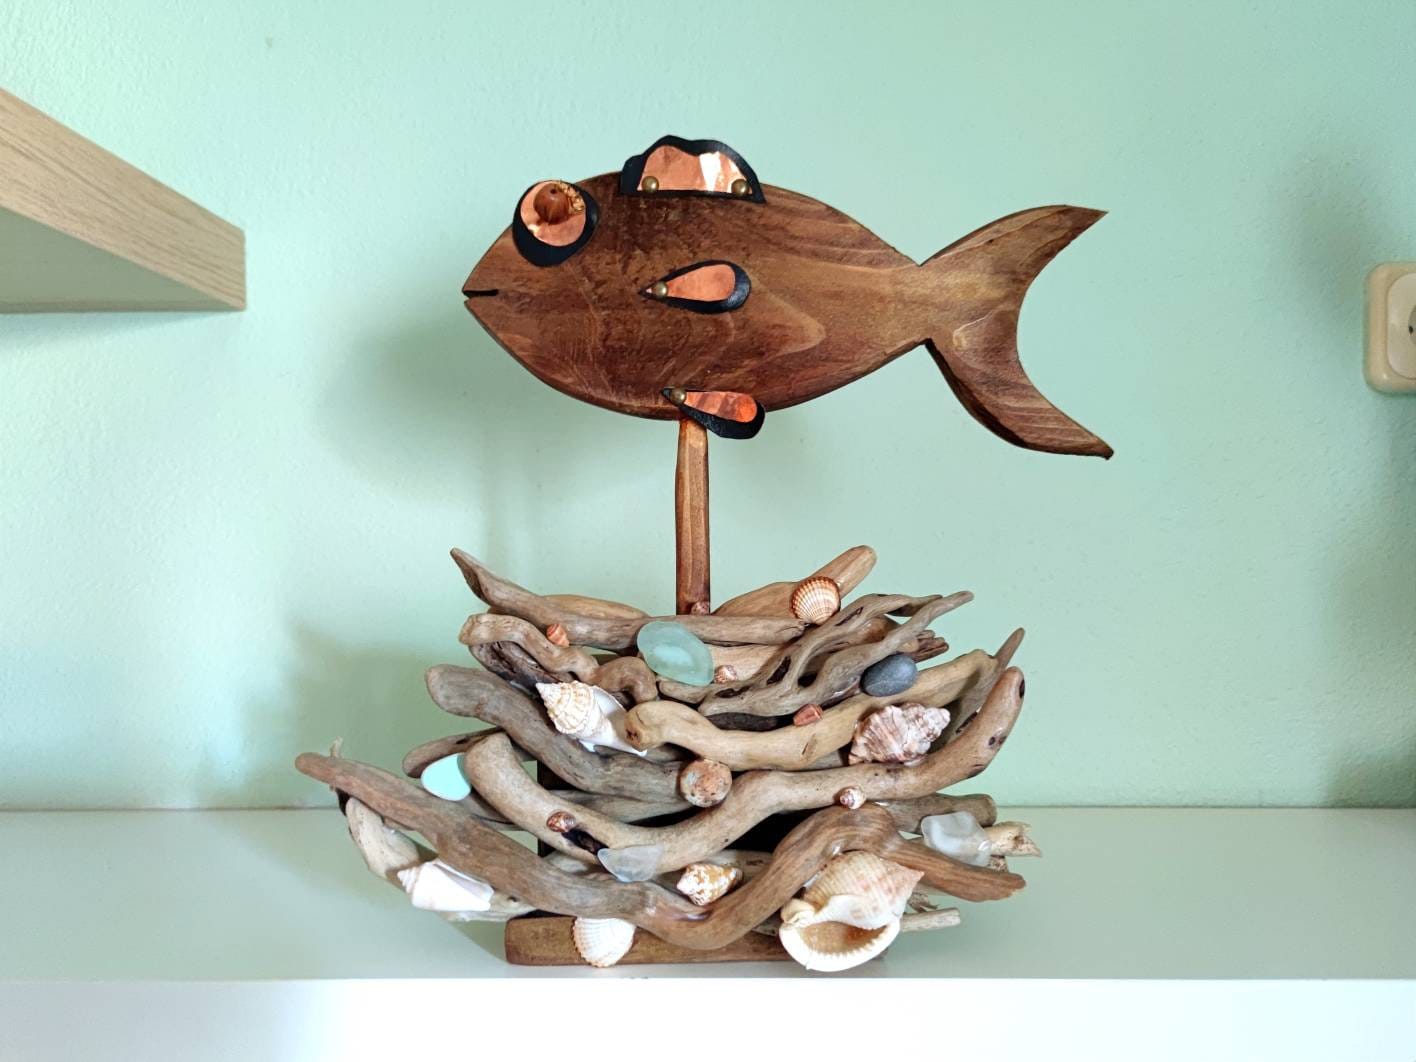 Wooden Fish Decor Hanging, Wood Fish Decorations for Wall, Rustic Nautical Fish Decor for Beach Theme, Home Decoration Fish Sculpture Home Decor for